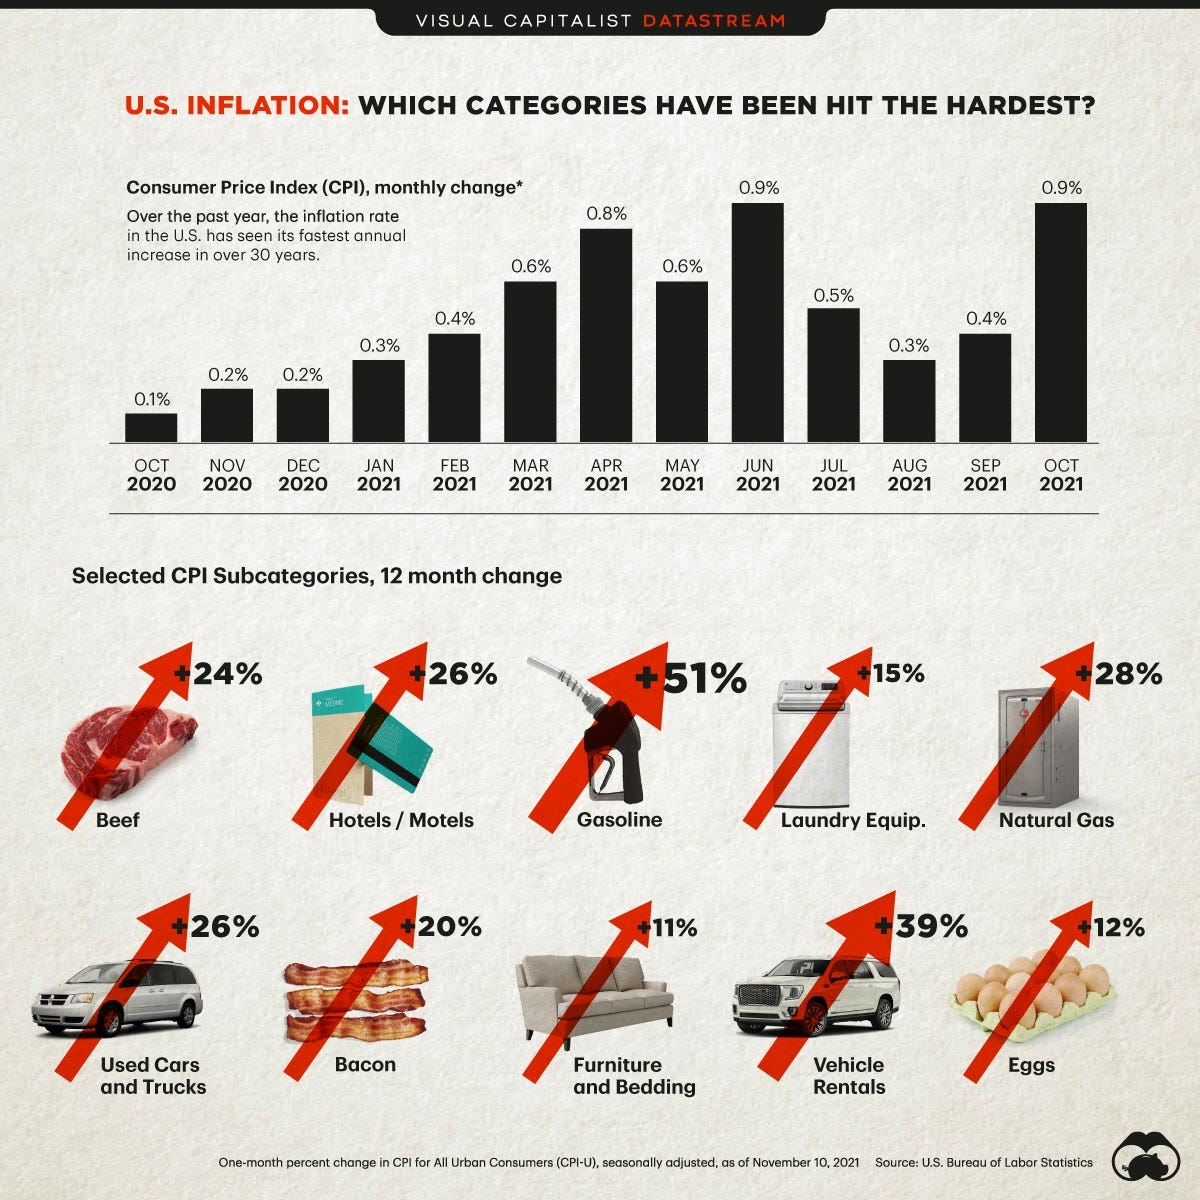 Visual Capitalist categories that have been impacted the harder by inflation in the US infographic